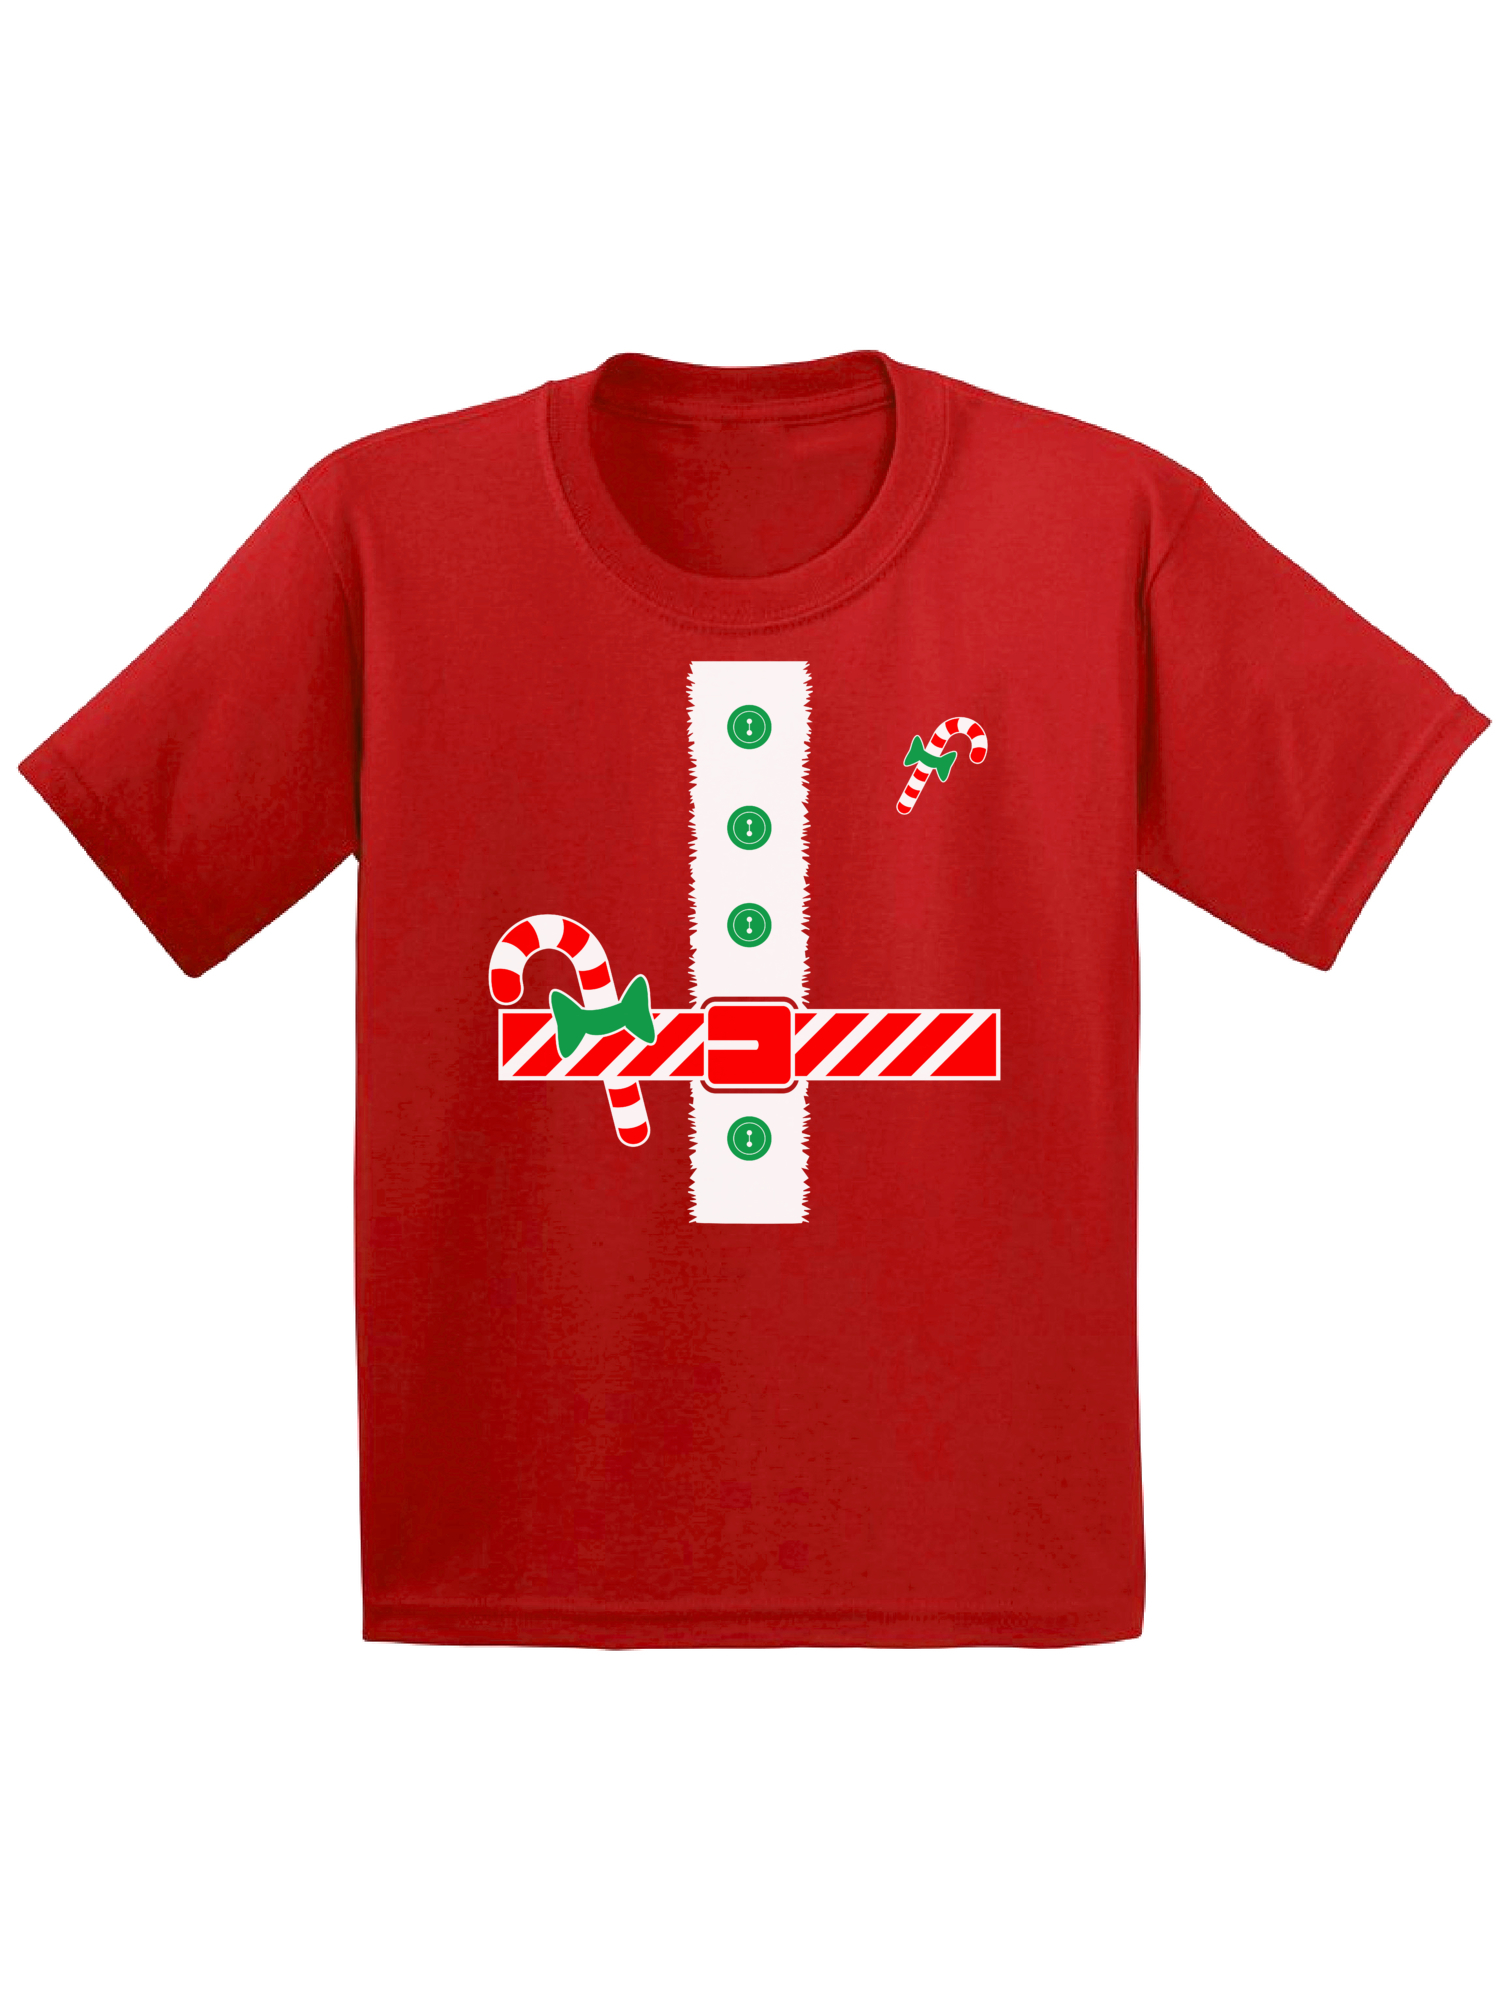 Awkward Styles Christmas Tuxedo Shirt for Kids Awkward Styles Tuxedo Shirt for Children Santa's Helper Funny Elf Holiday Party T-Shirt Xmas Gifts for Youth Christmas Tee - image 1 of 4